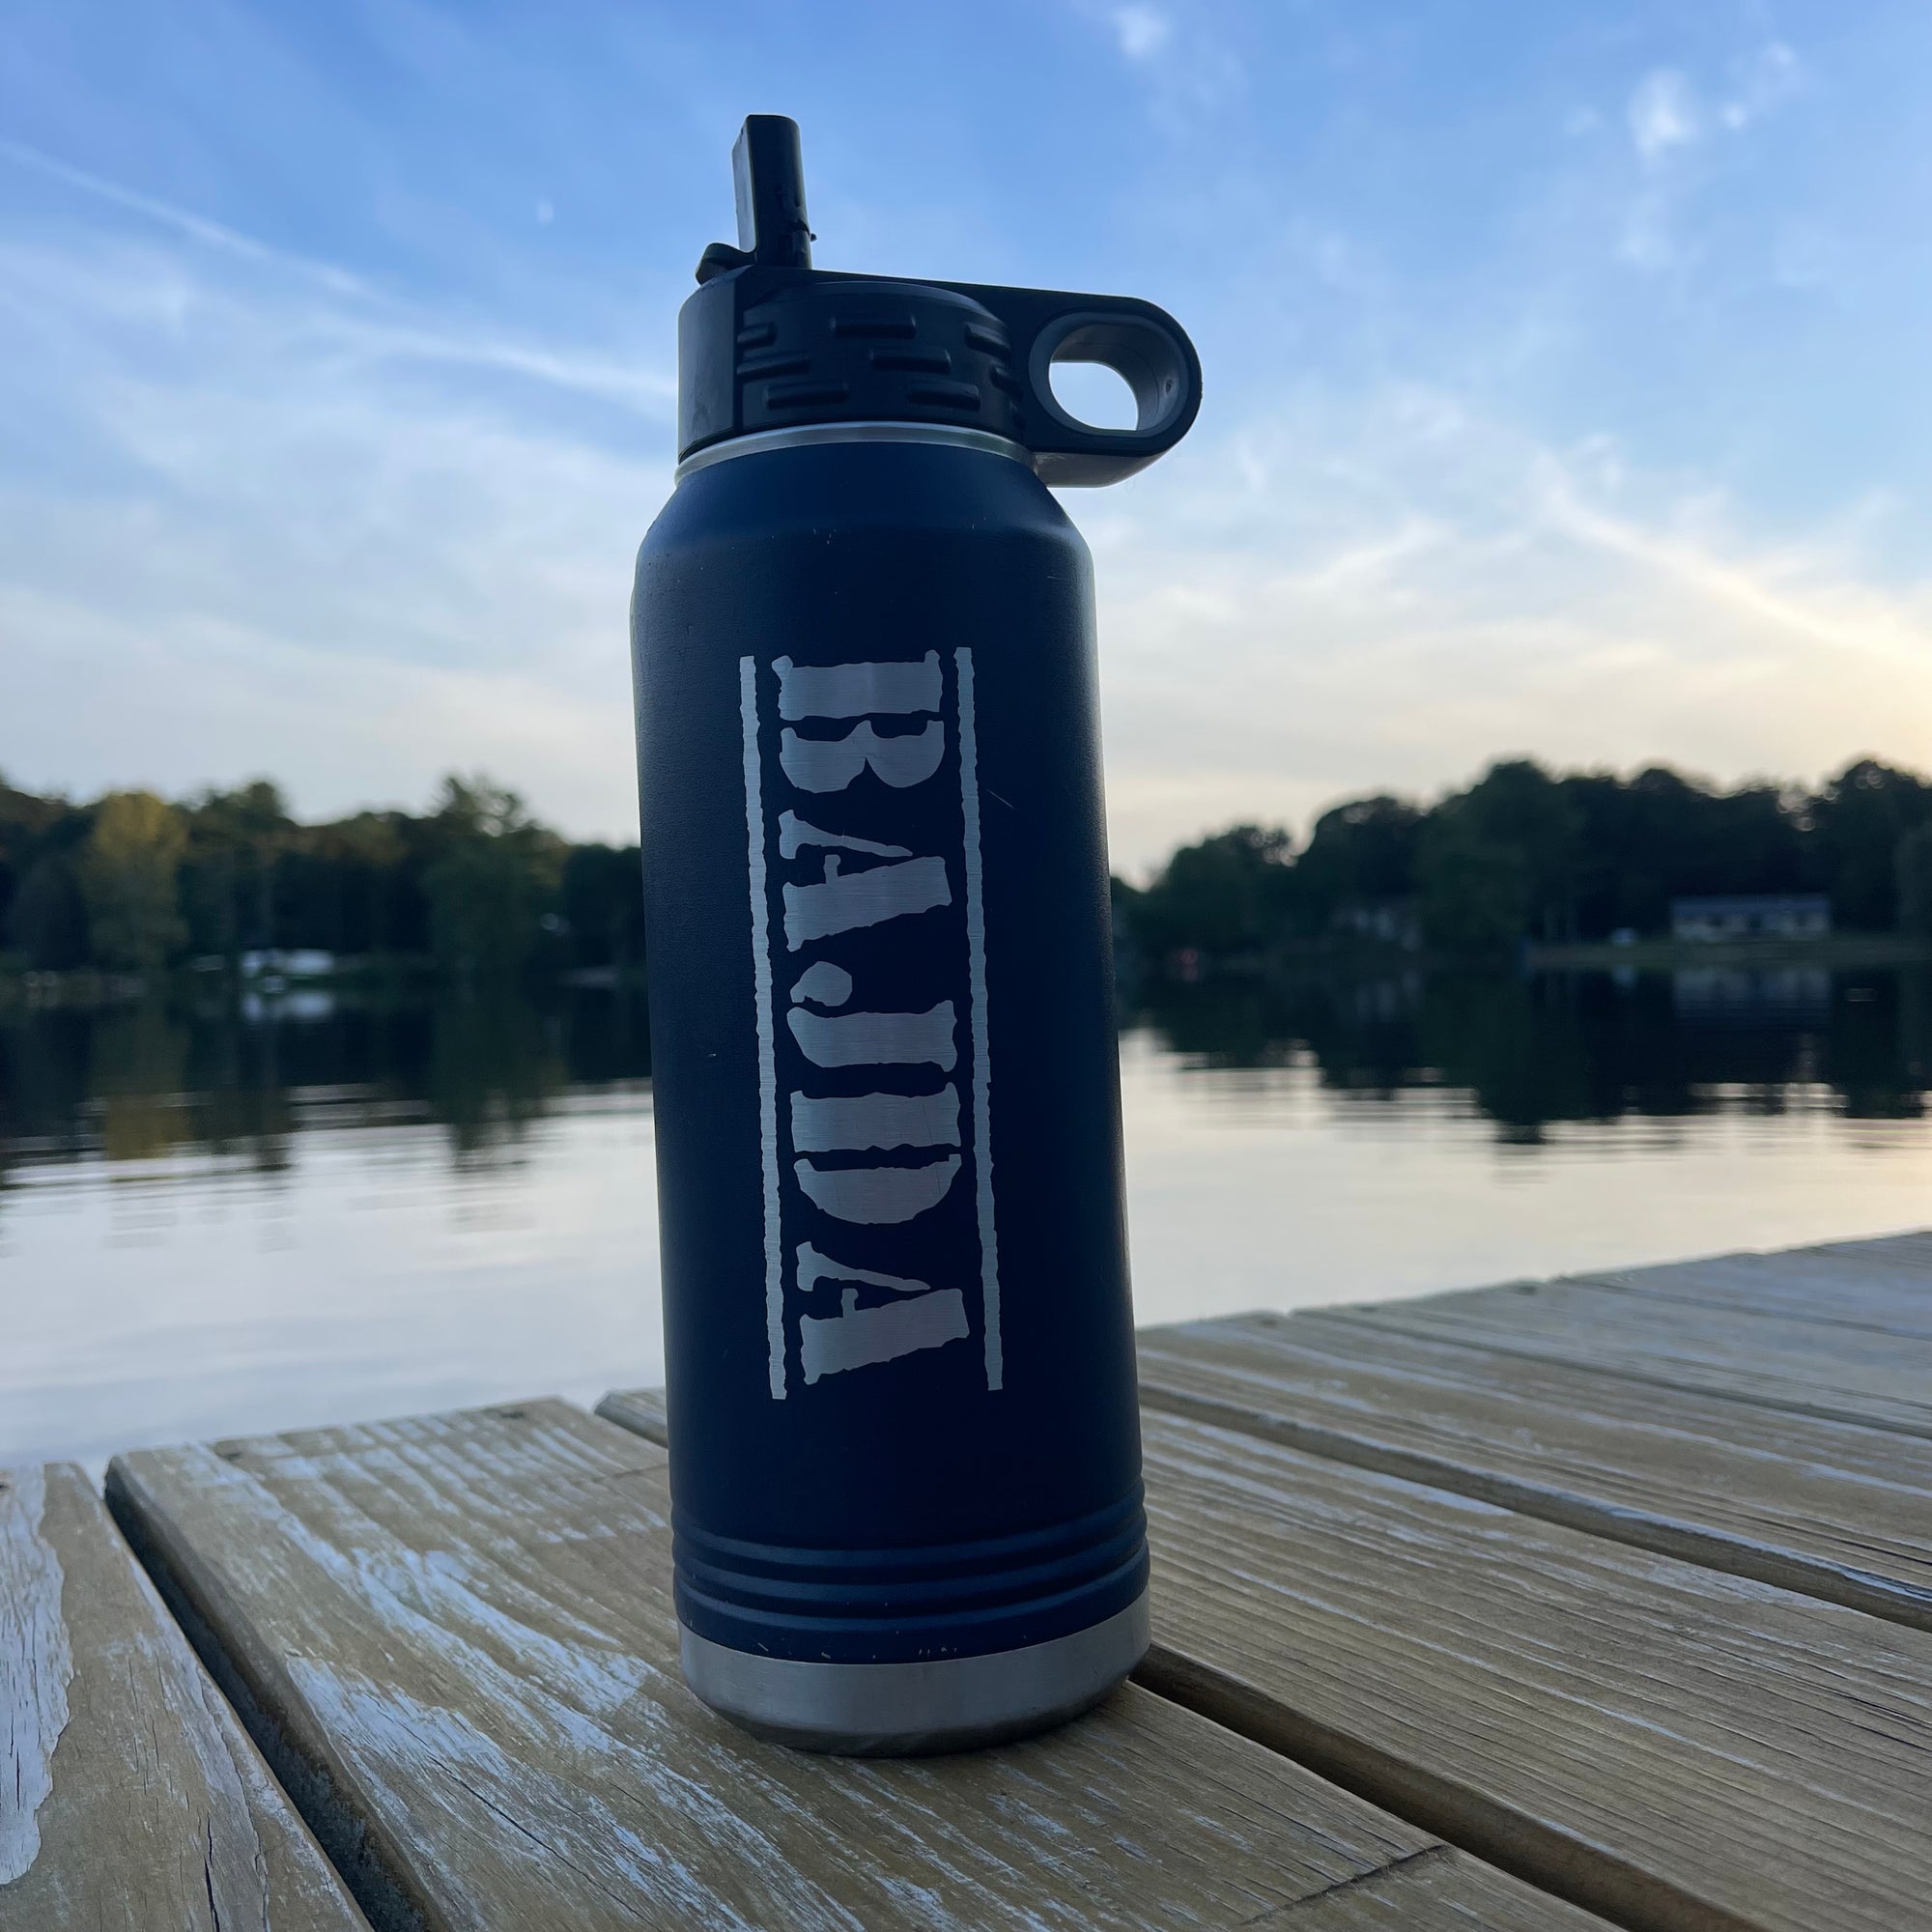 Personalized Baseball Water Bottle - Groovy Guy Gifts